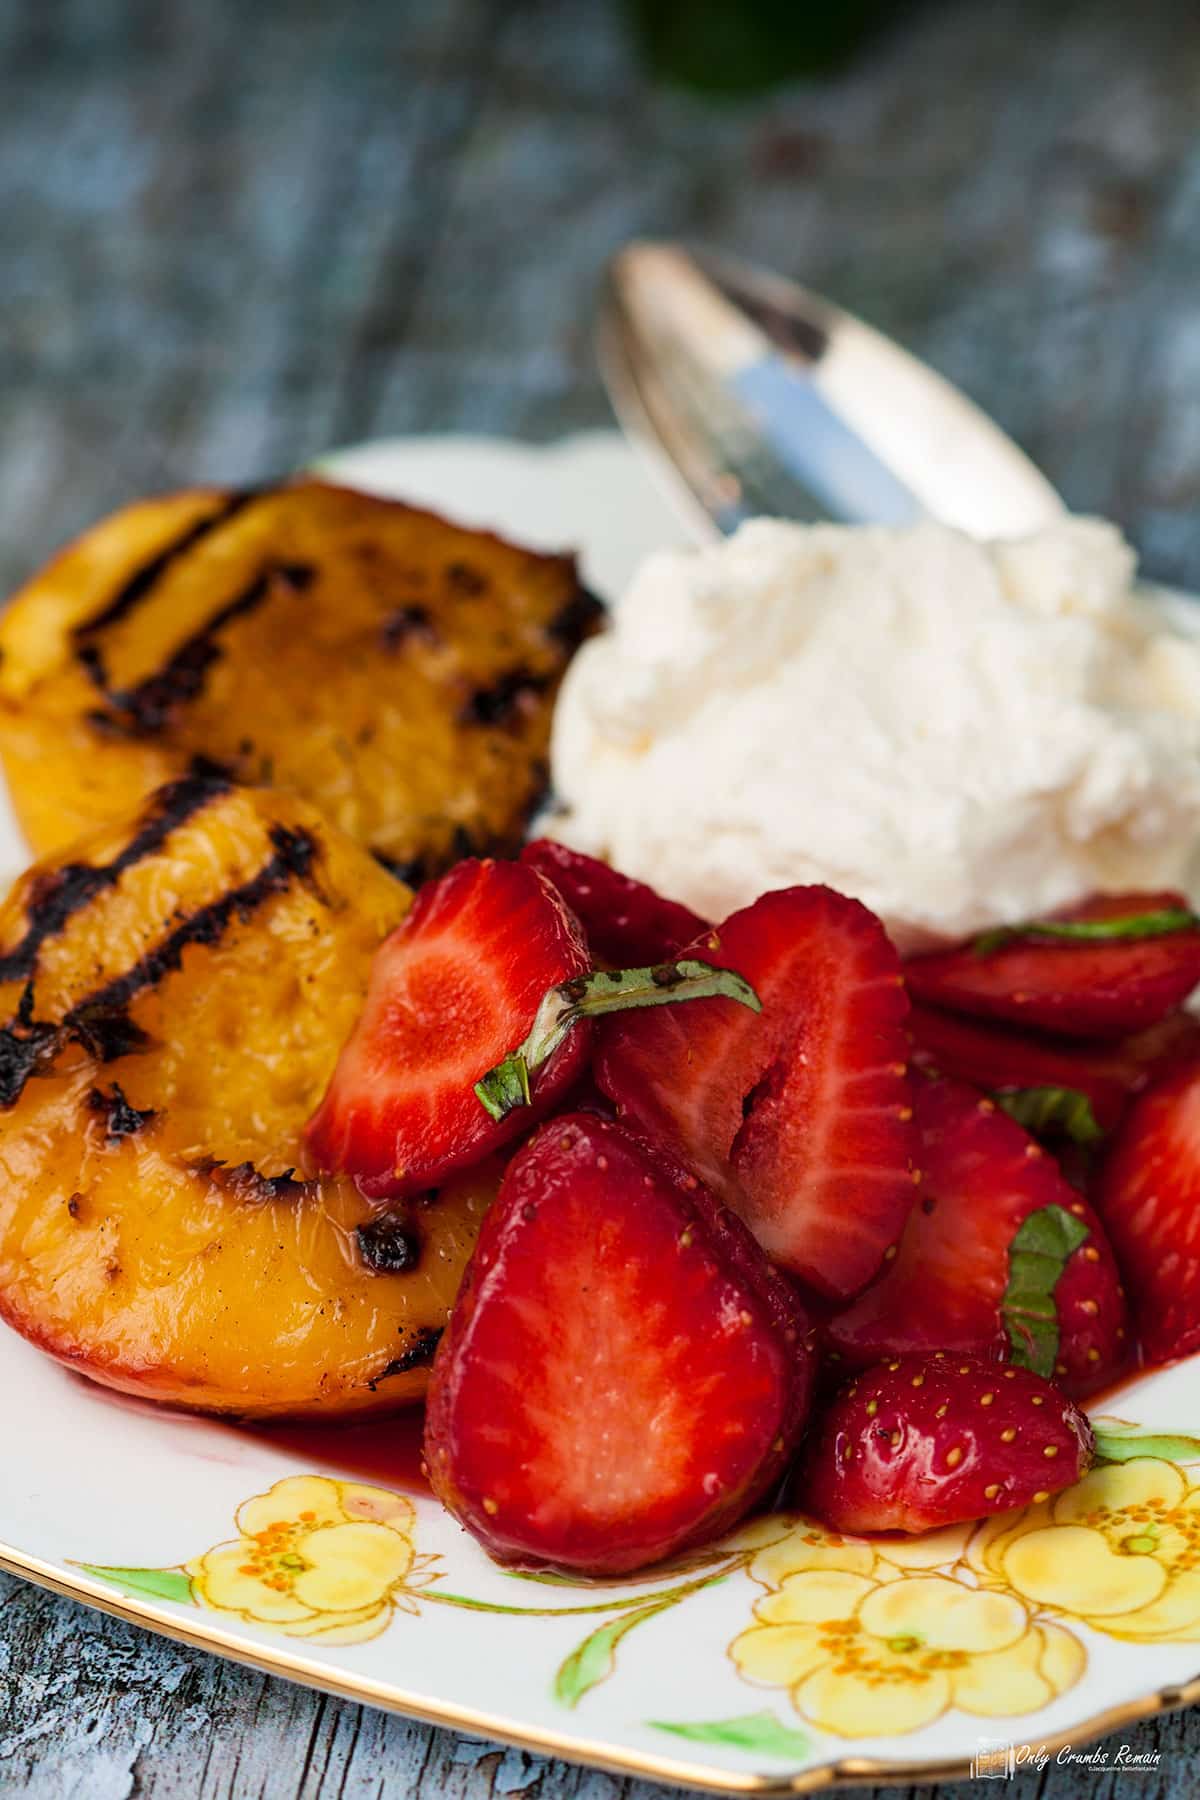 griddled peaches served with macerated strawberries and basil cream.